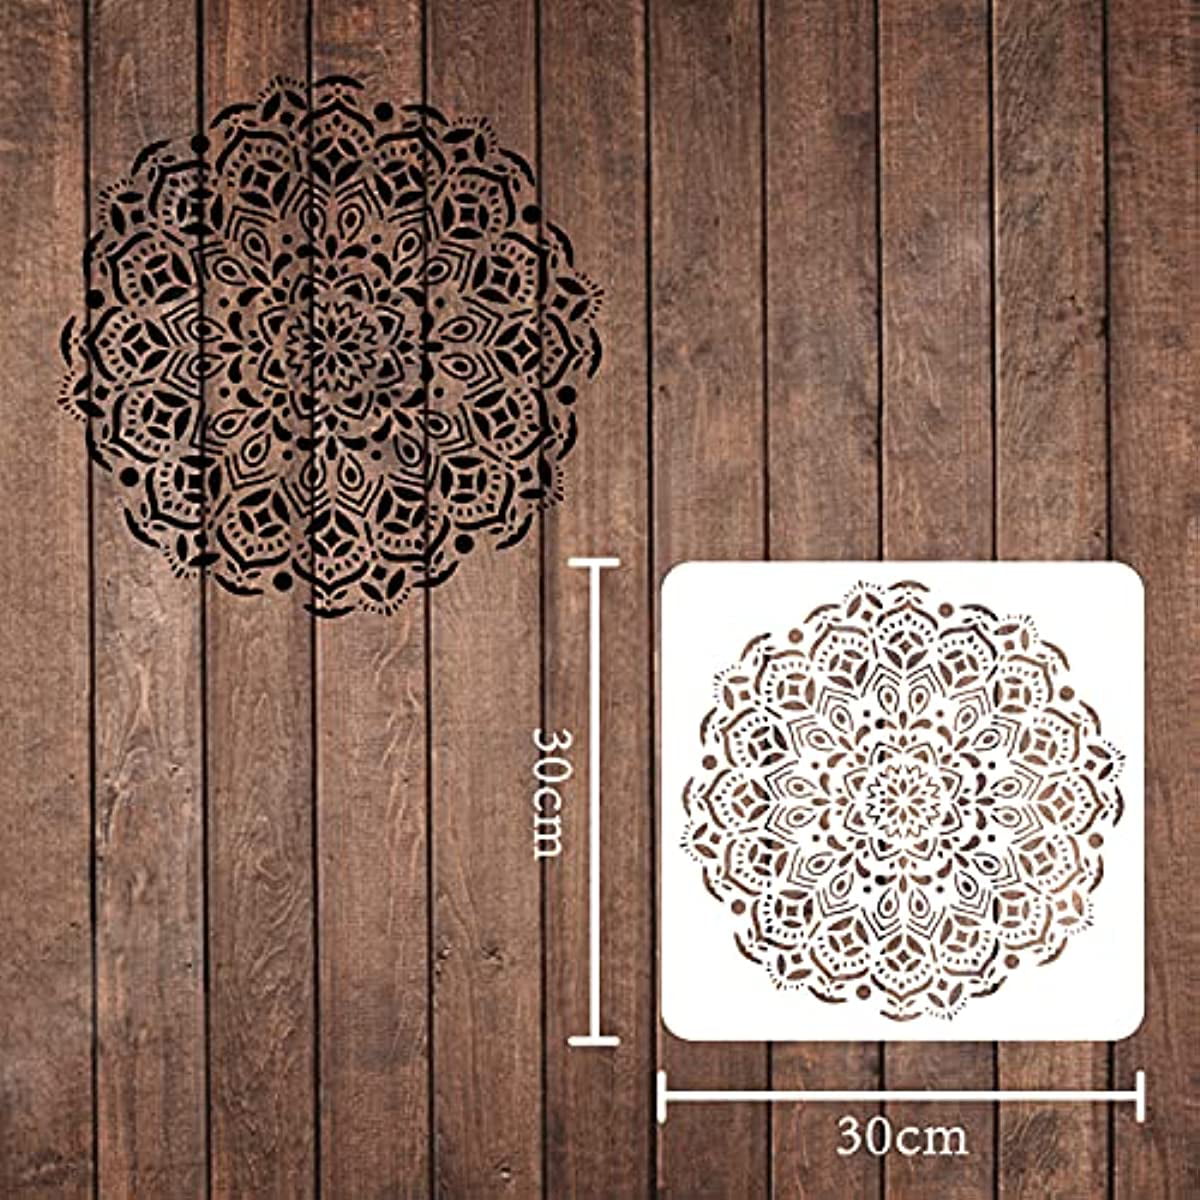 SAVITA 16pcs Large Circle Stencils for Painting, Plastic Templates 2.4-9.8  Inches Reusable Circle Stencils for Walls Paper Wood Art Projects Home